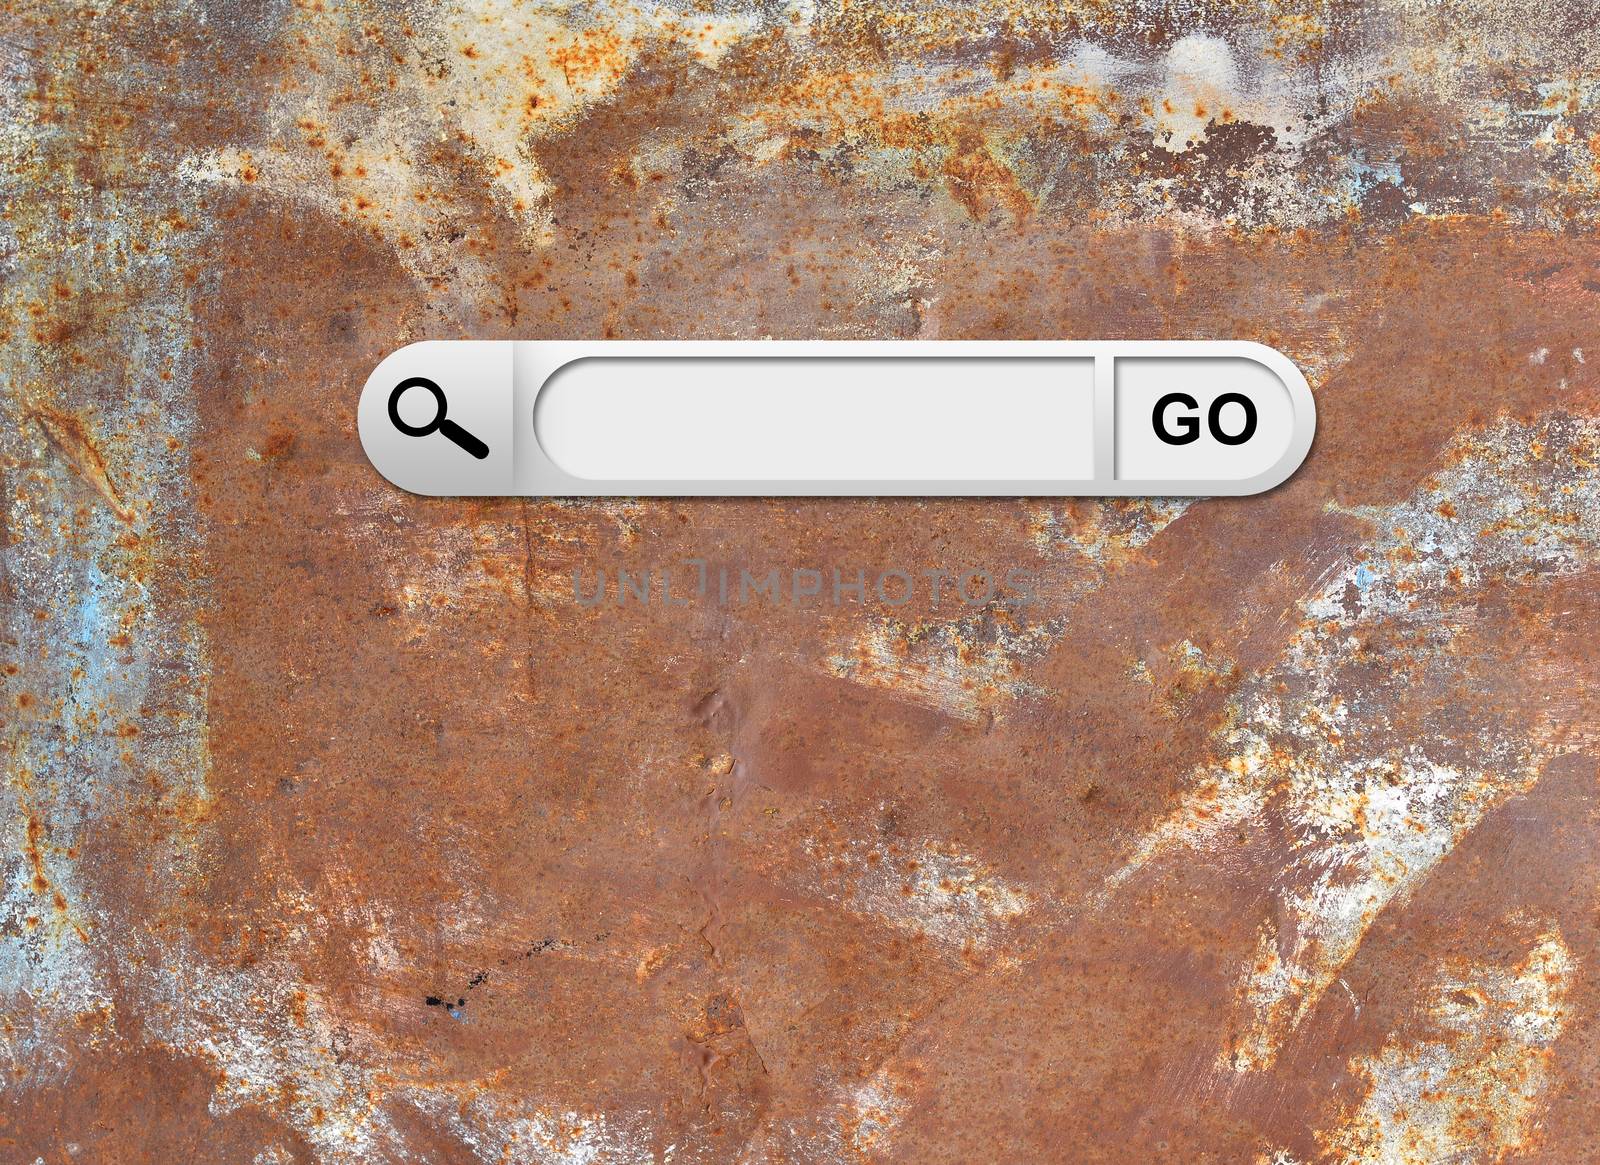 Search bar in browser. Old rusty metal surface on background